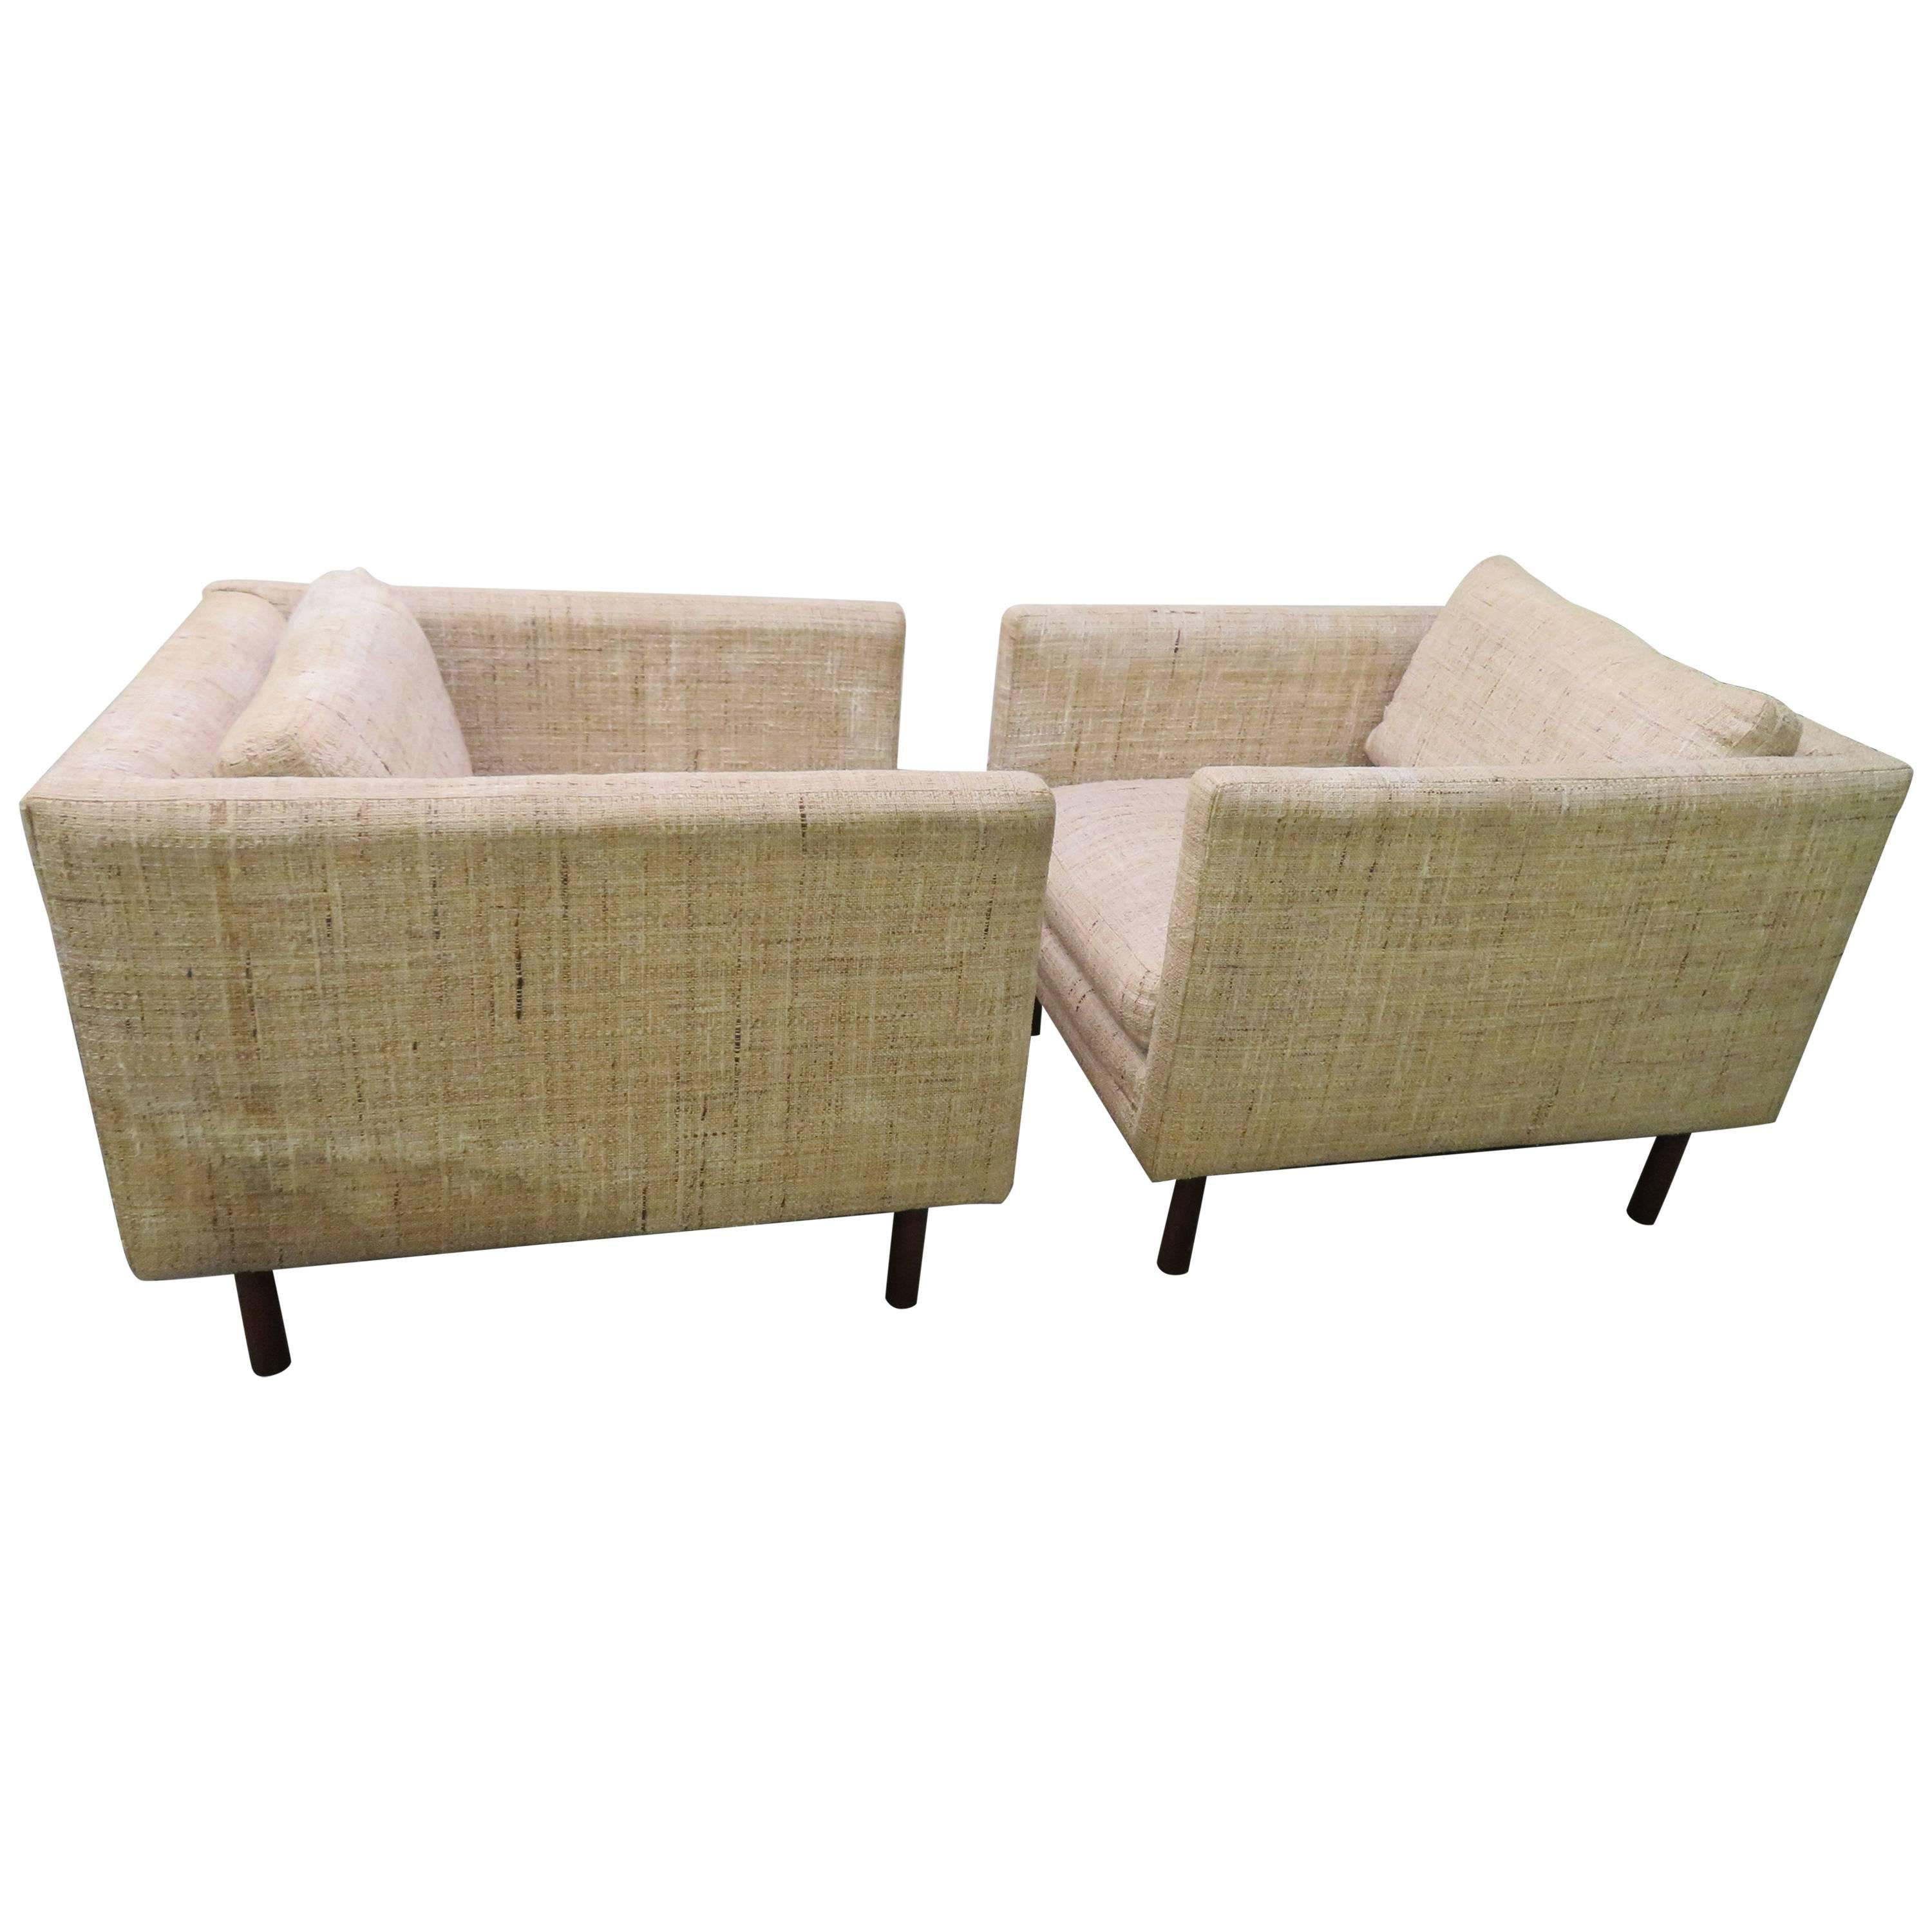 Wonderful Signed Pair of Milo Baughman Cube Chairs Mid-Century Modern For Sale